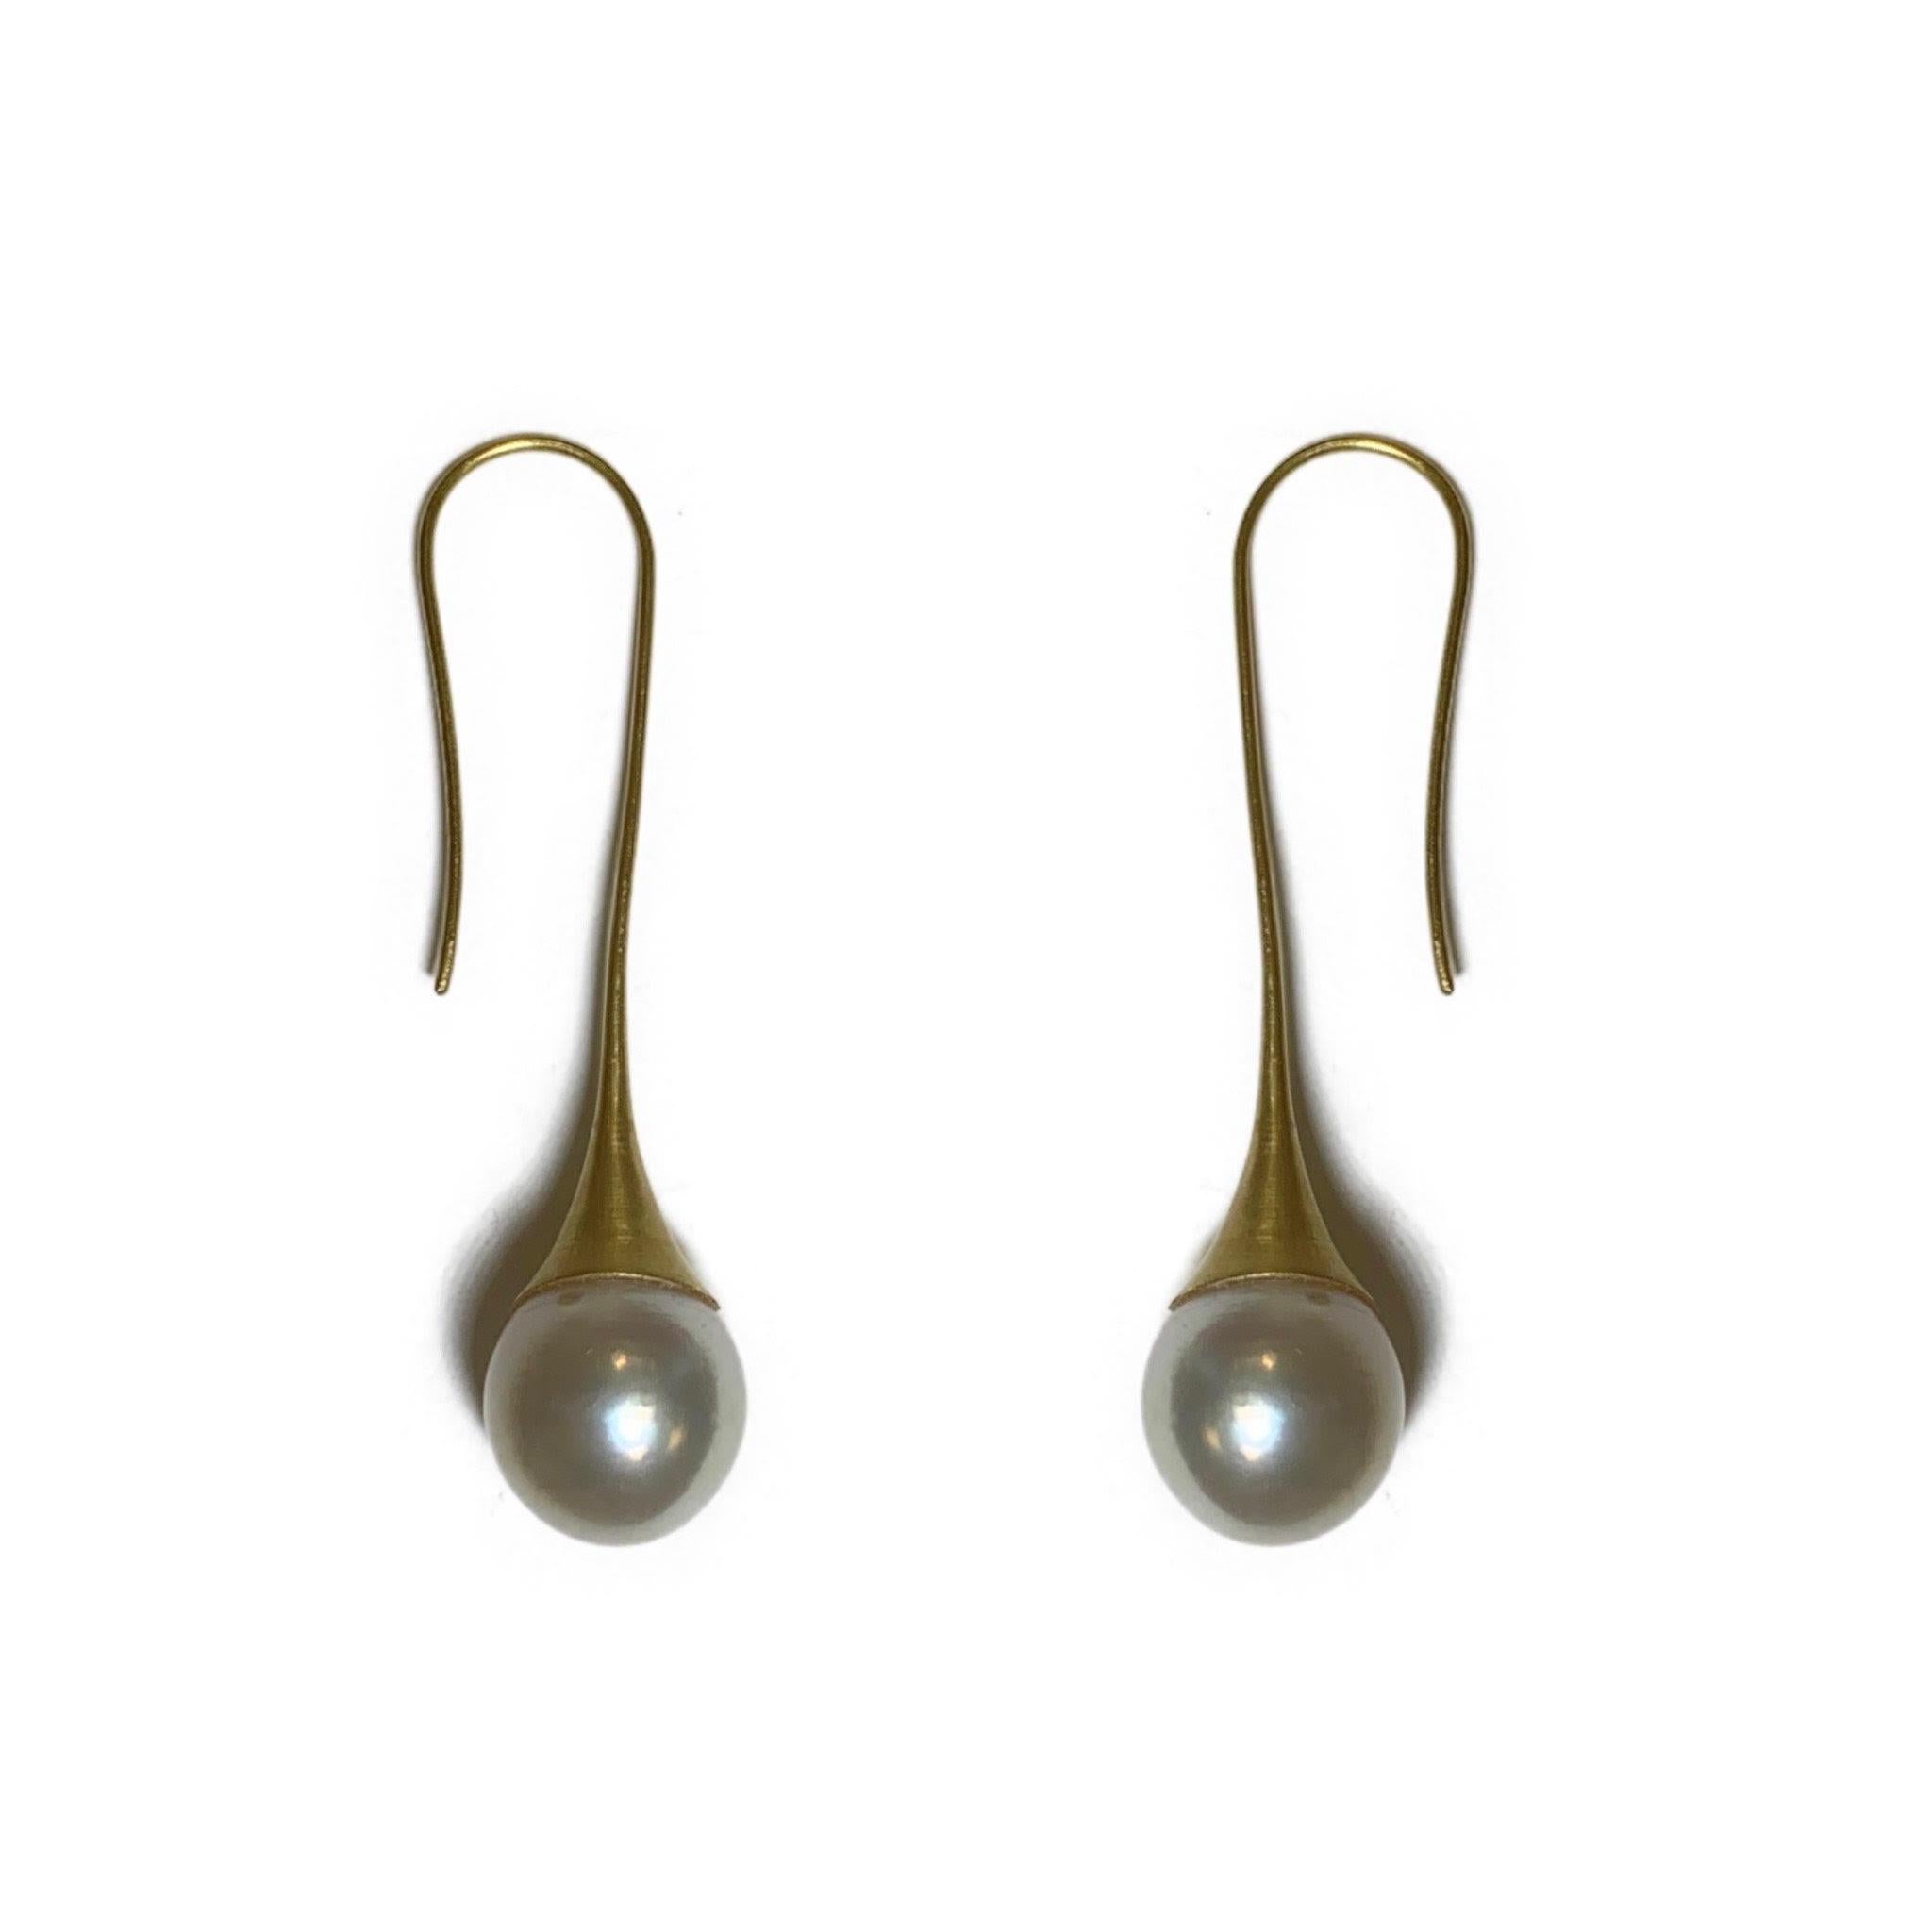 These elegant pearl drop earrings weigh 26.30 carats total. These ear wire earring are made of 18 Karat Yellow Gold and has a soft satin finish. 

A2 by Arunashi
South Sea Pearl on Medium Trumpet Drop Earrings
18 Karat Yellow Gold 
South Sea Pearls